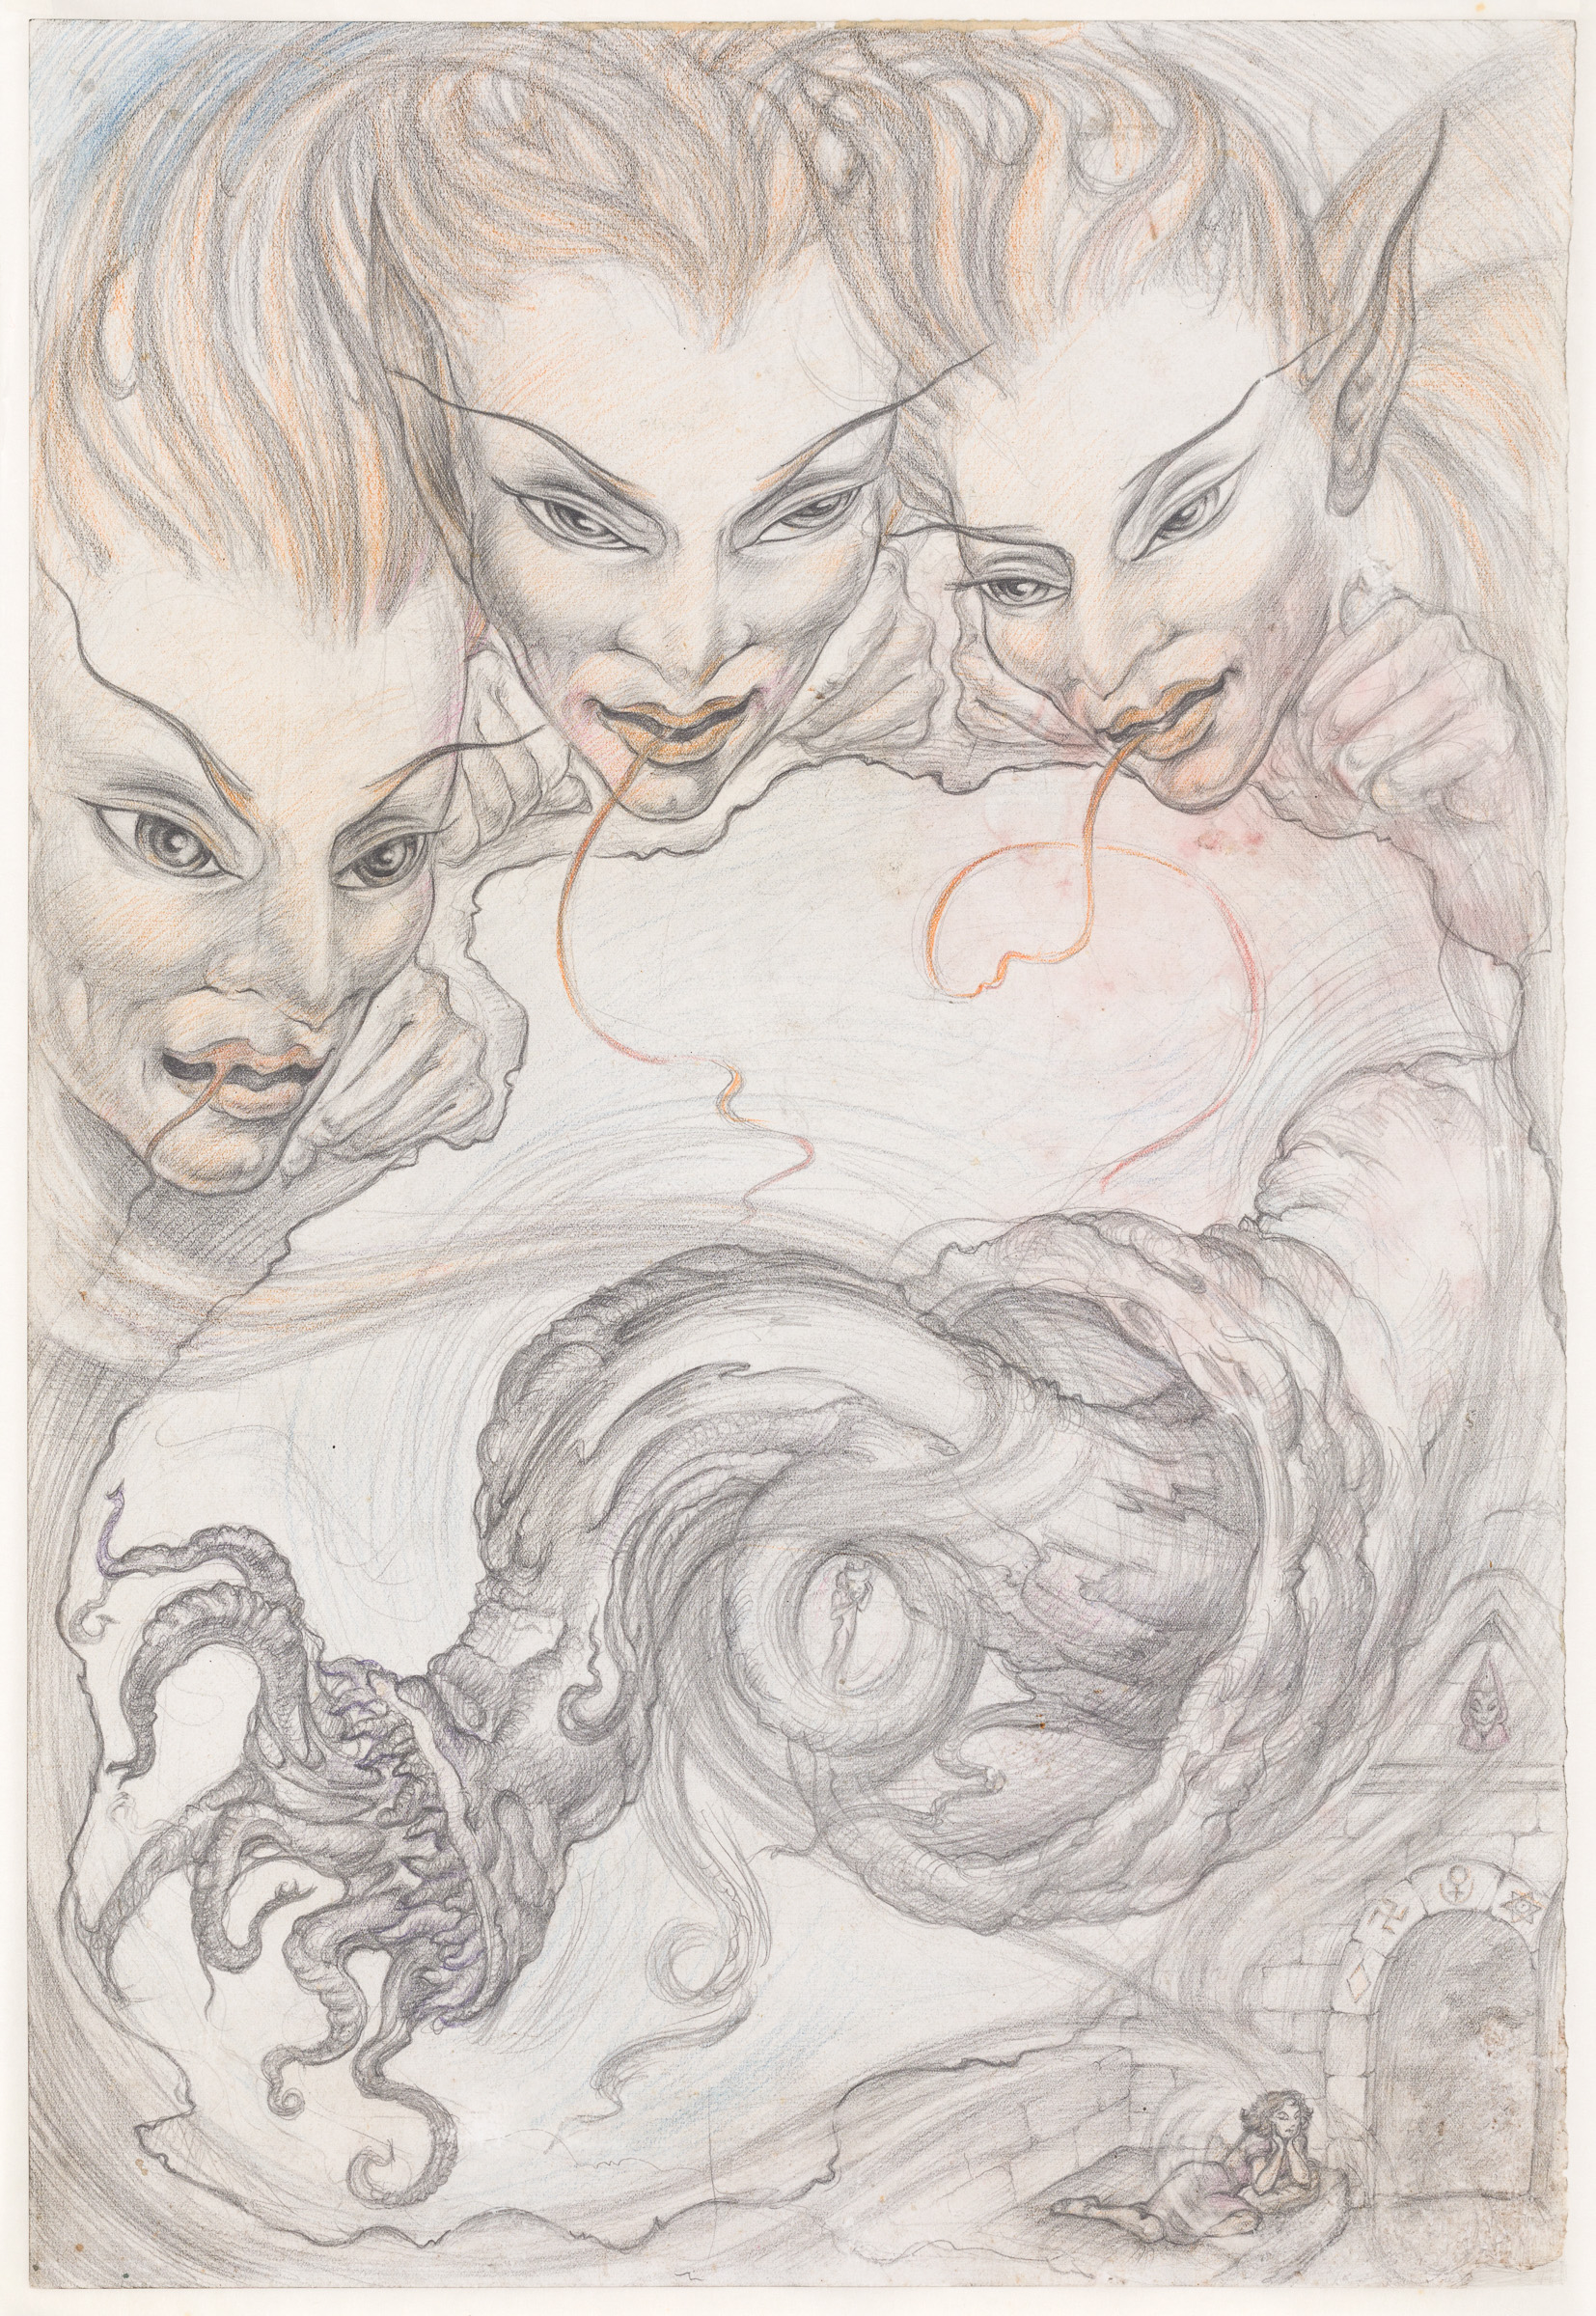 Three female witches peer over a scene of swirling claw-like tendrils that hover above a woman lying in front of an occult temple. The witches have spiked hair, pointed eyebrows and long tentacles that protude from their lips.